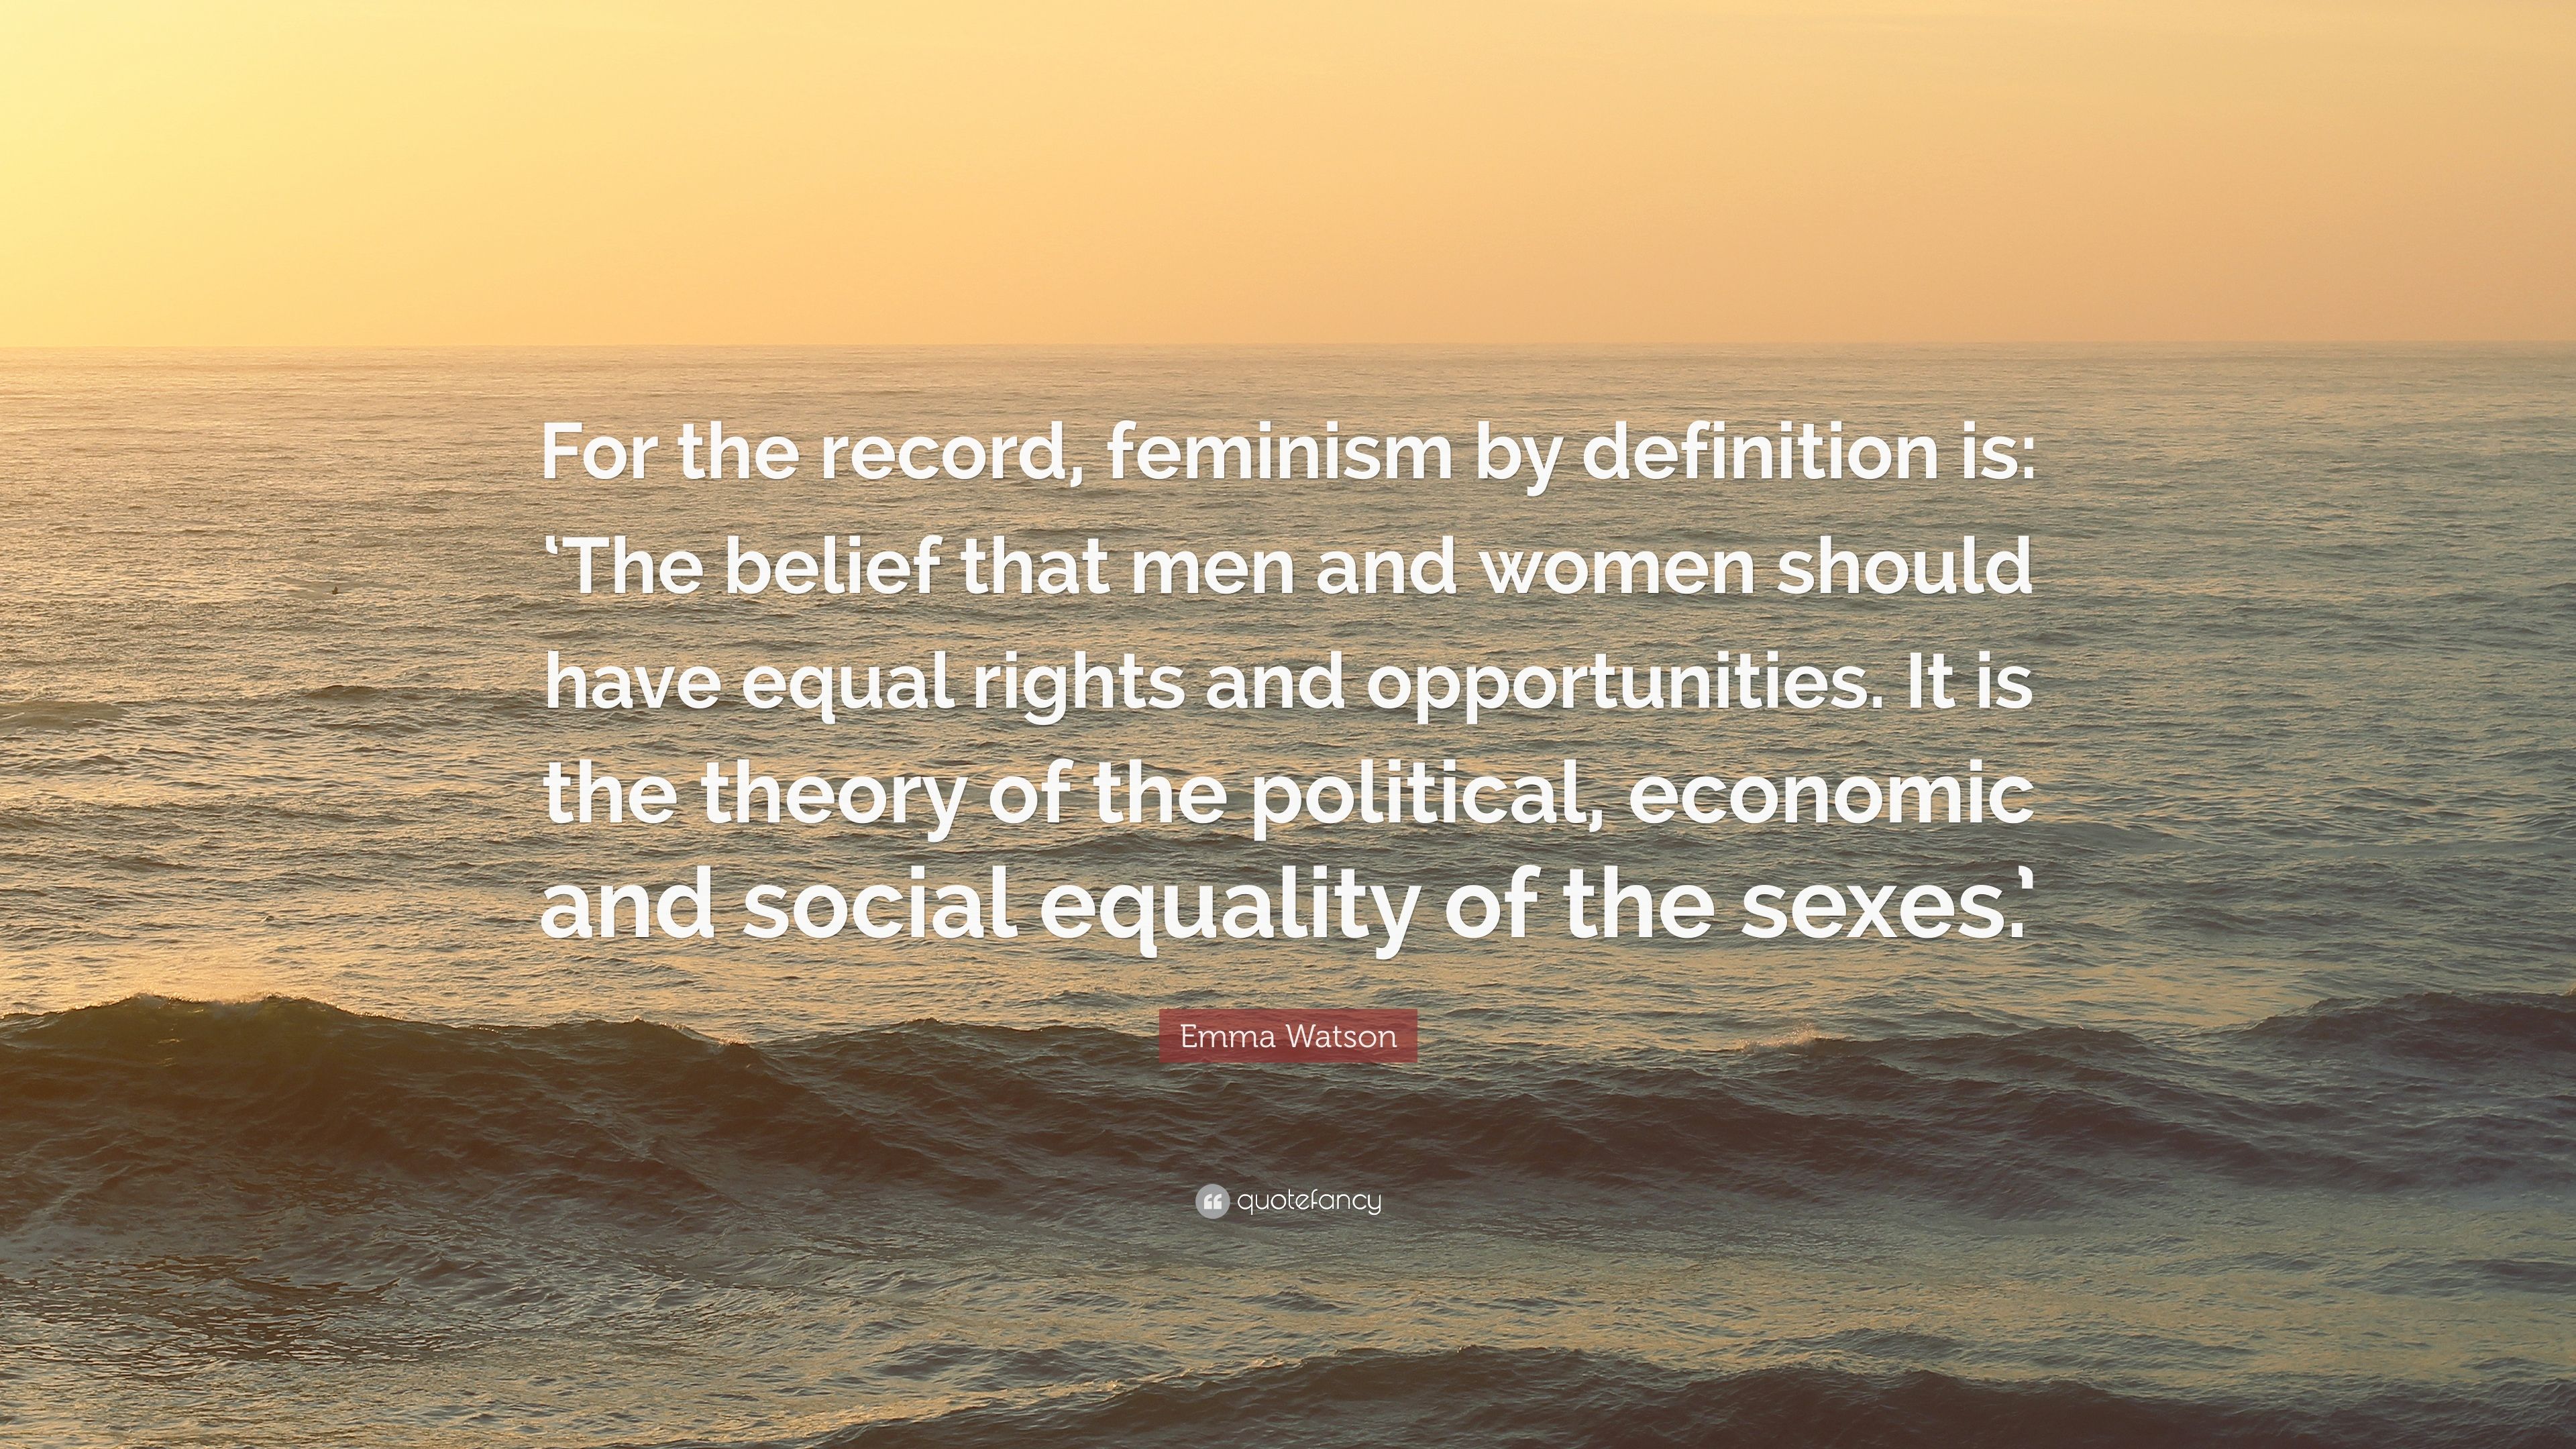 Emma Watson Quote: “For the record, feminism by definition is: 'The belief that men and women should have equal rights and opportunities. It.”